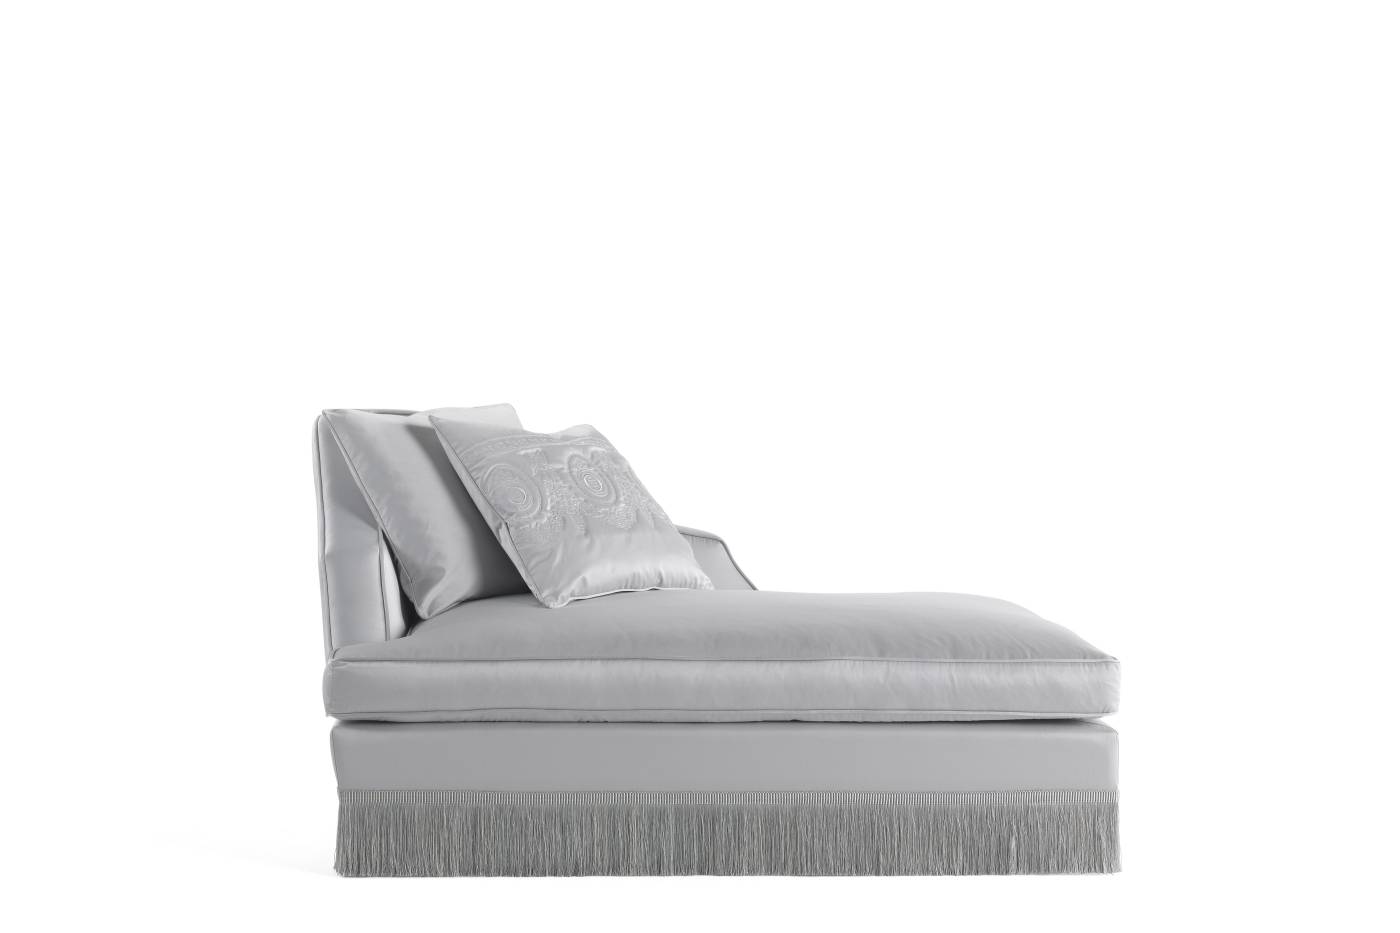 WHEIDON chaise longue - convey elegance to each space with Italian classic chaise longues and dormeuses of the classic Oro Bianco collection